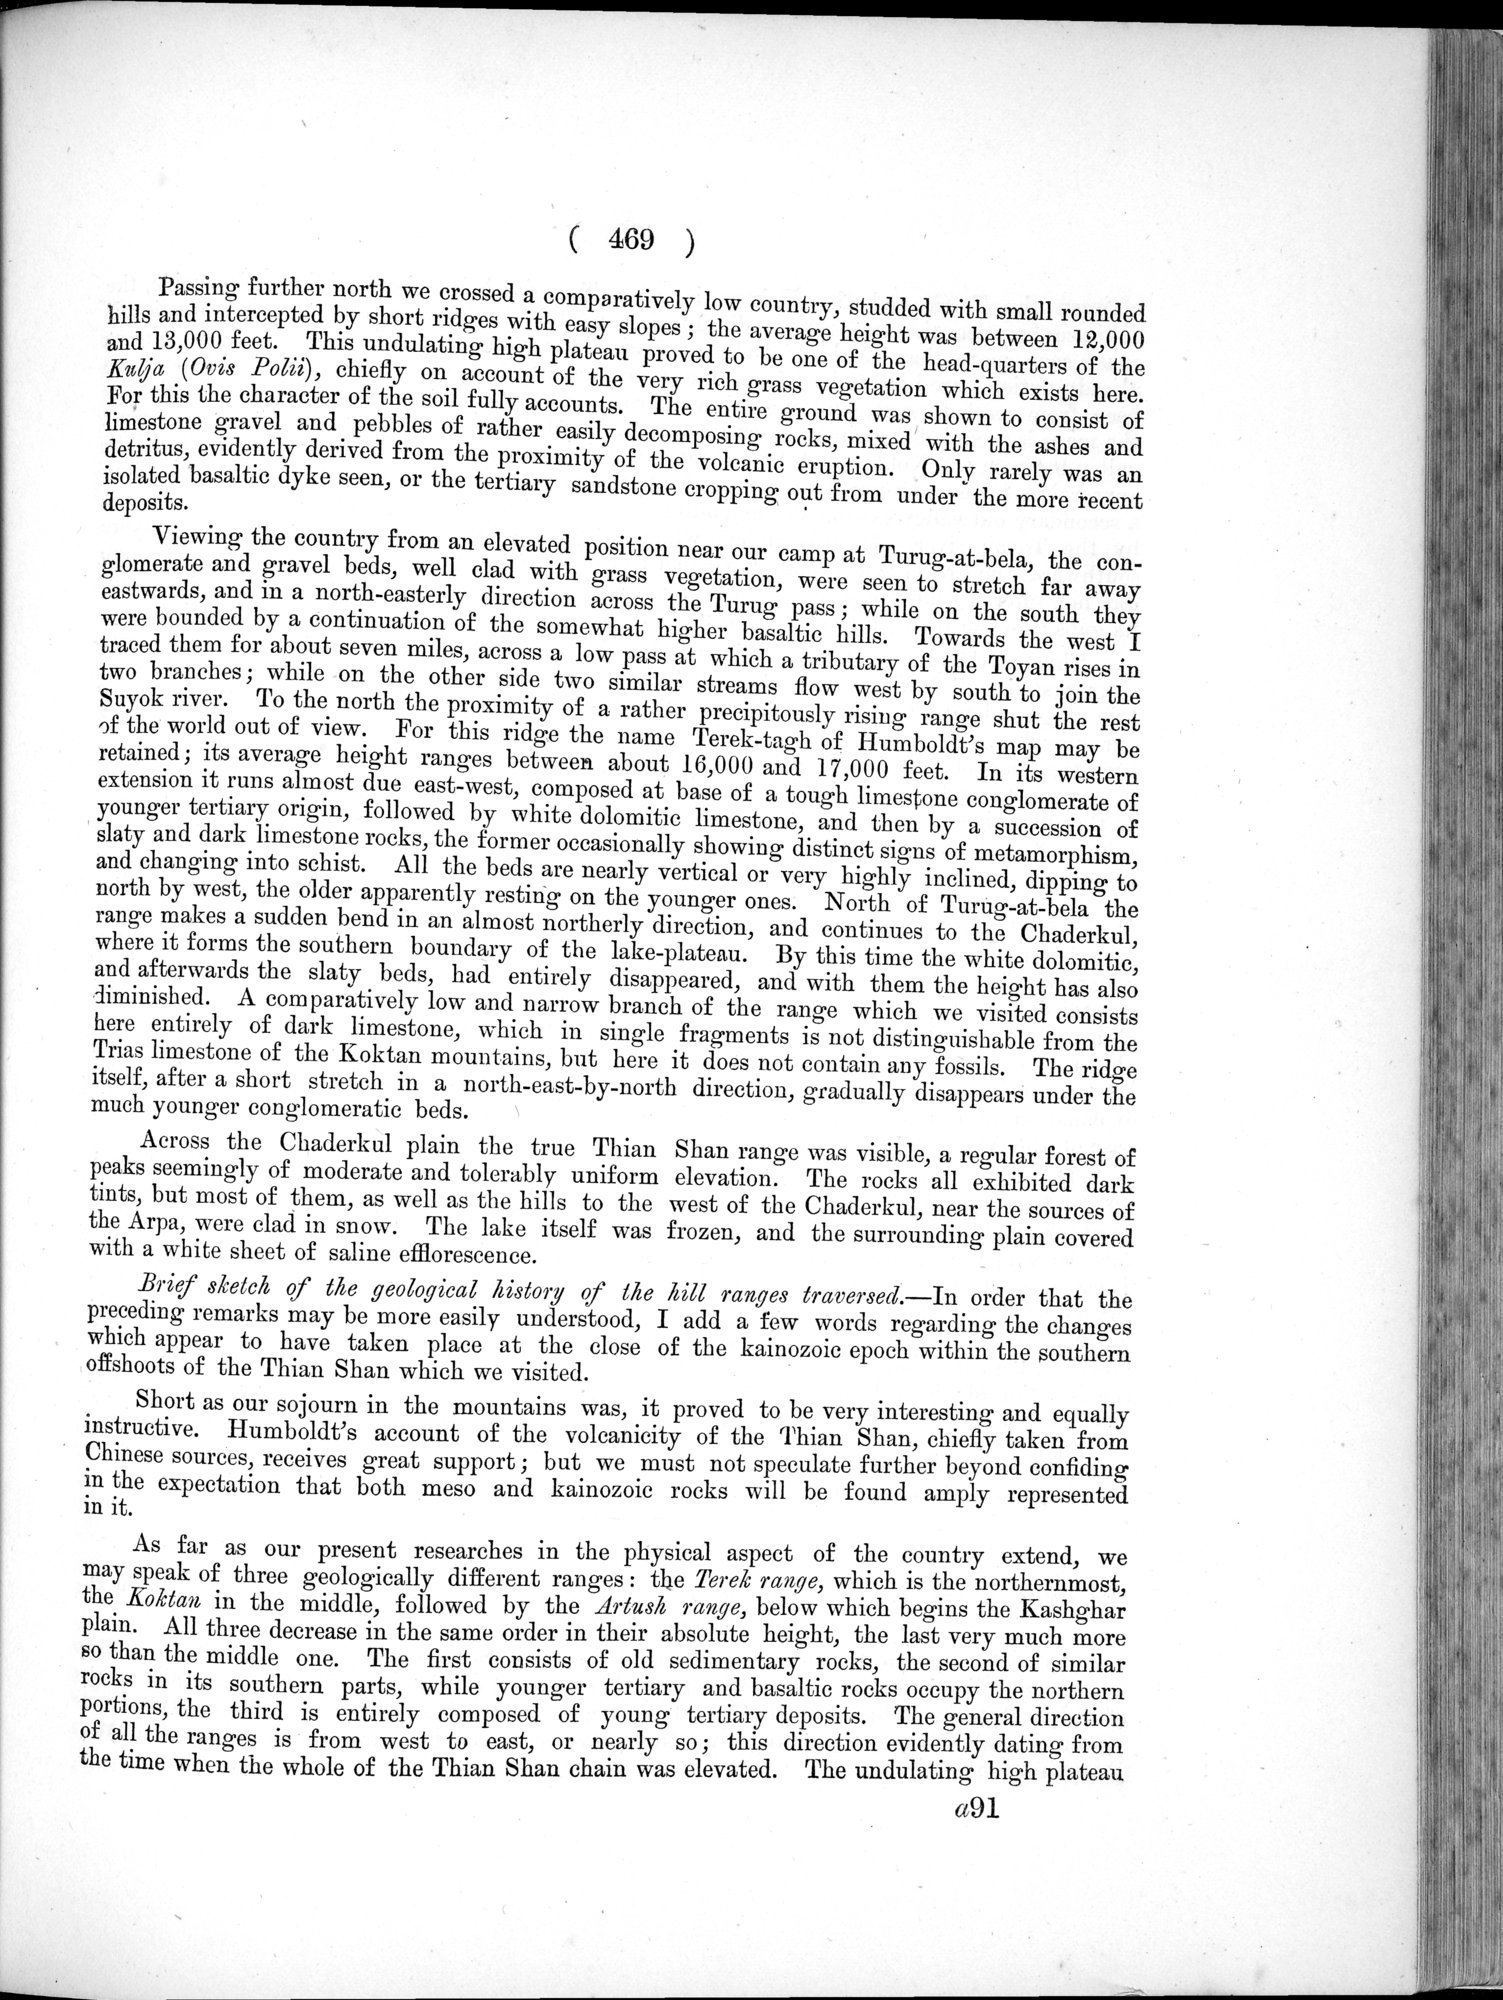 Report of a Mission to Yarkund in 1873 : vol.1 / Page 603 (Grayscale High Resolution Image)